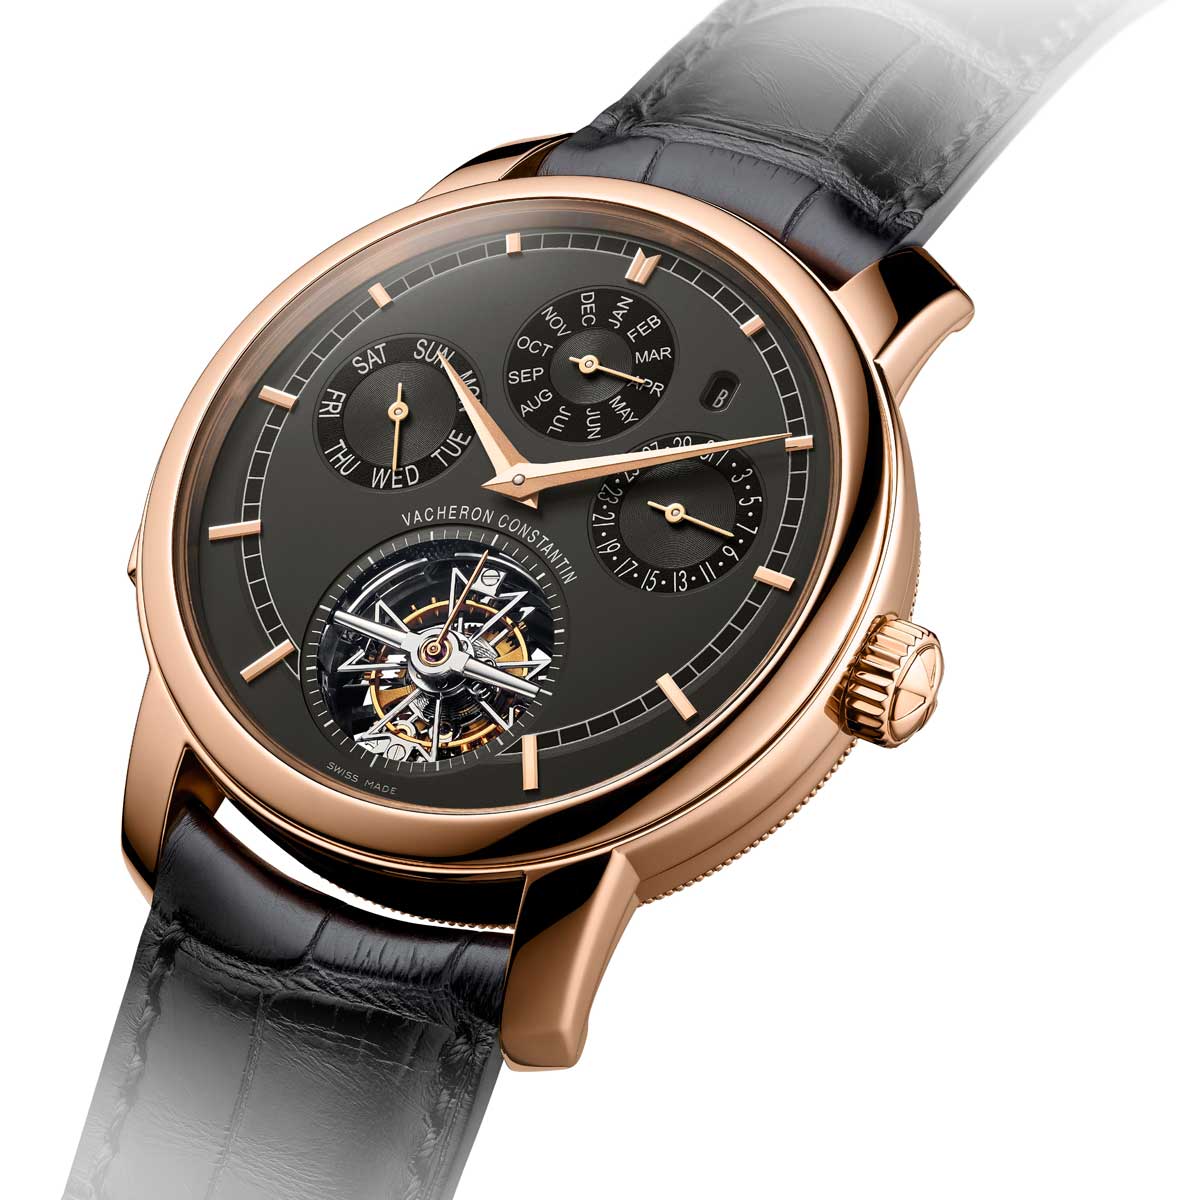 Vacheron Constantin - New Traditionnelle models with slate grey dials ...